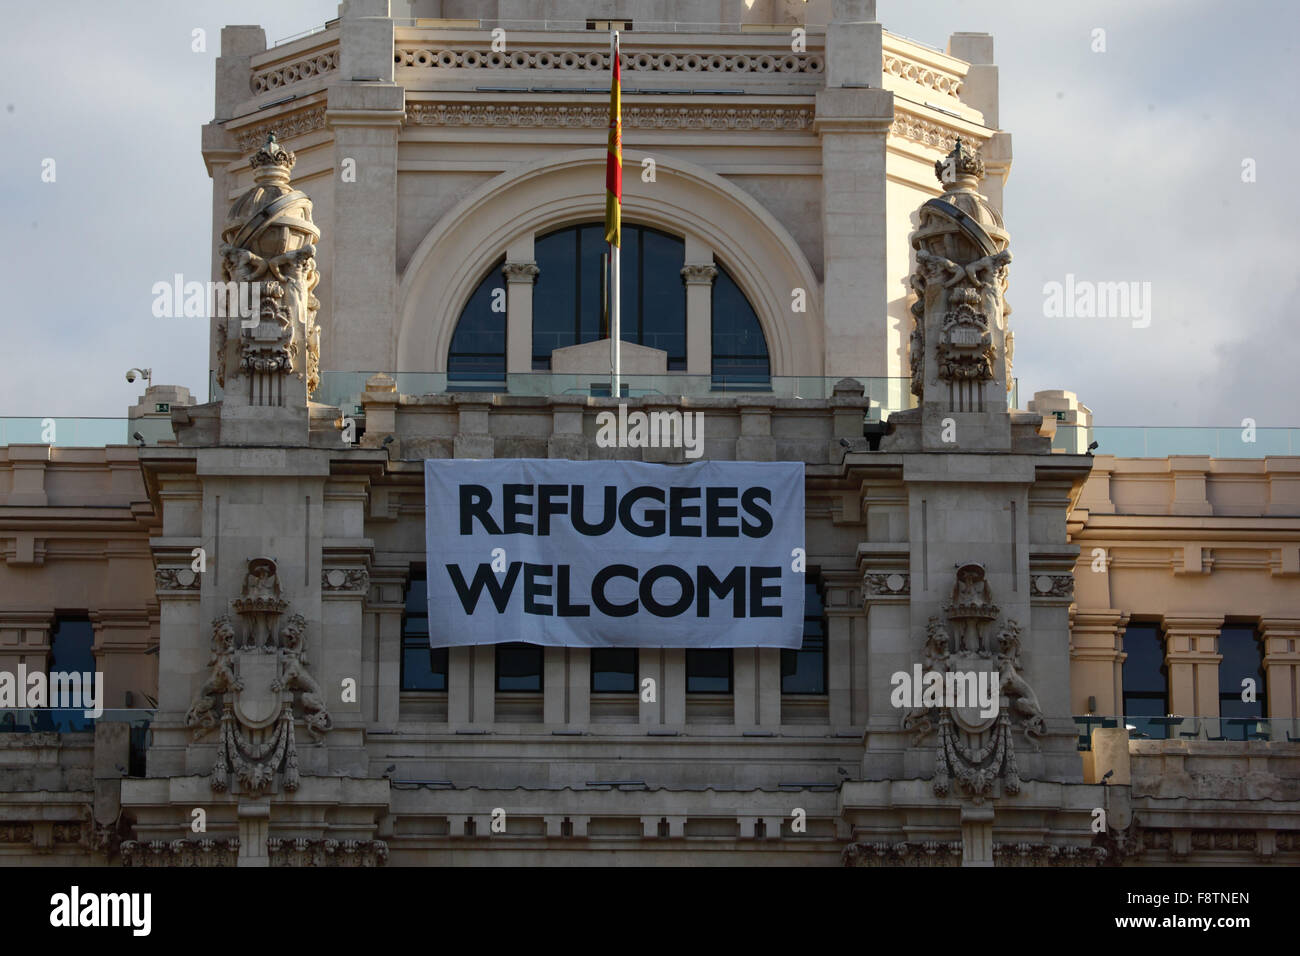 Madrid, Spain 11th December 2015: A 'Refugees Welcome' banner hangs above the entrance of the Palacio de Comunicaciones building. Credit:  James Brunker / Alamy Live News Stock Photo